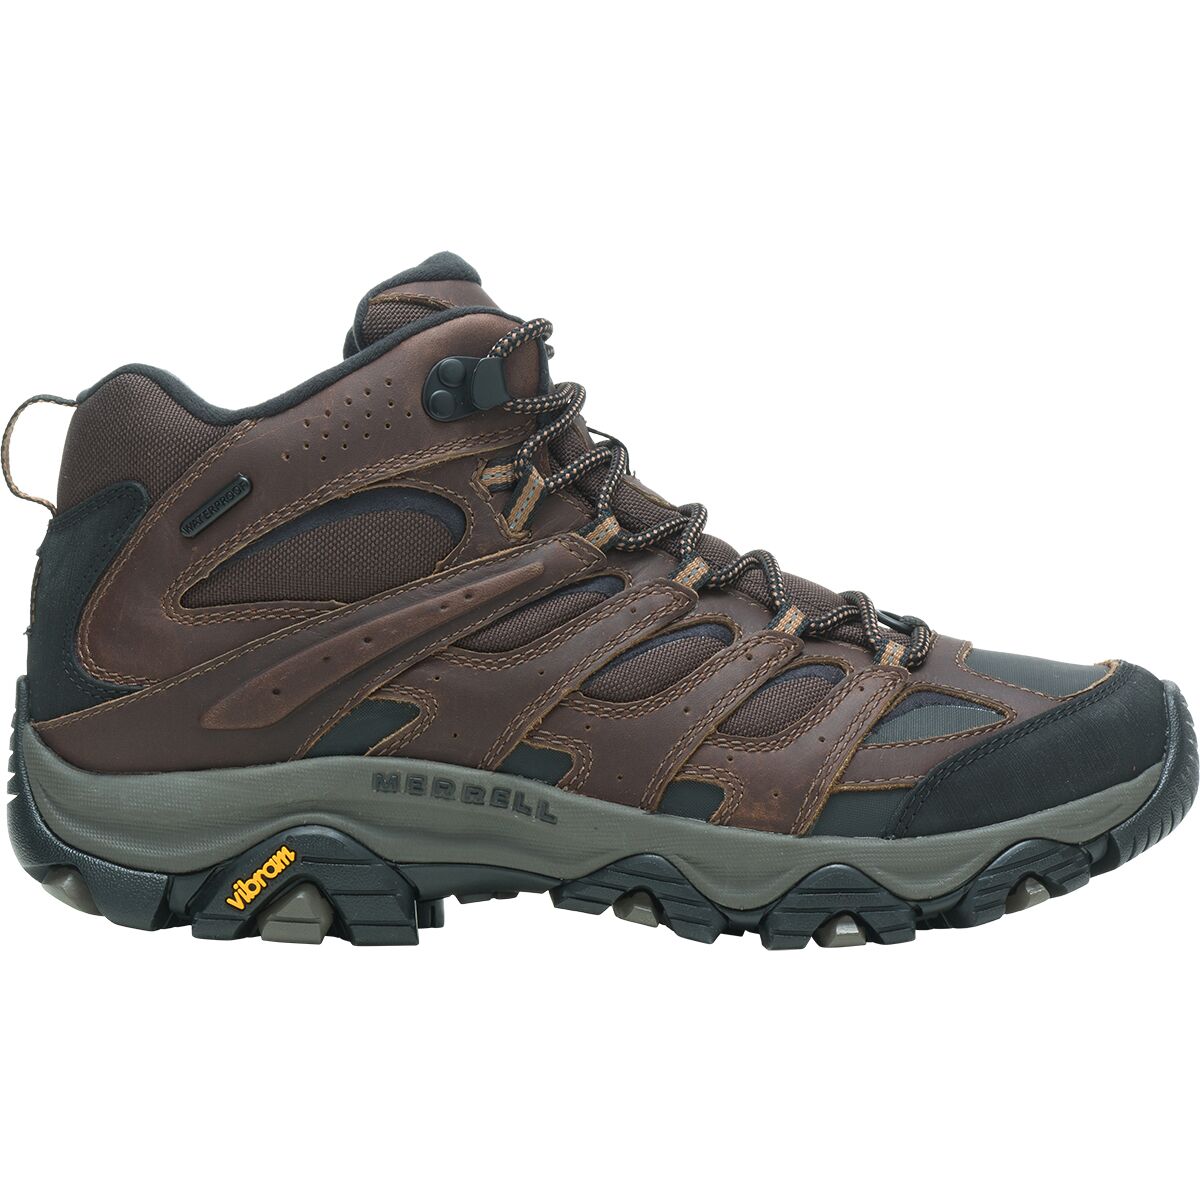 Moab 3 Thermo Mid WP Boot - Men